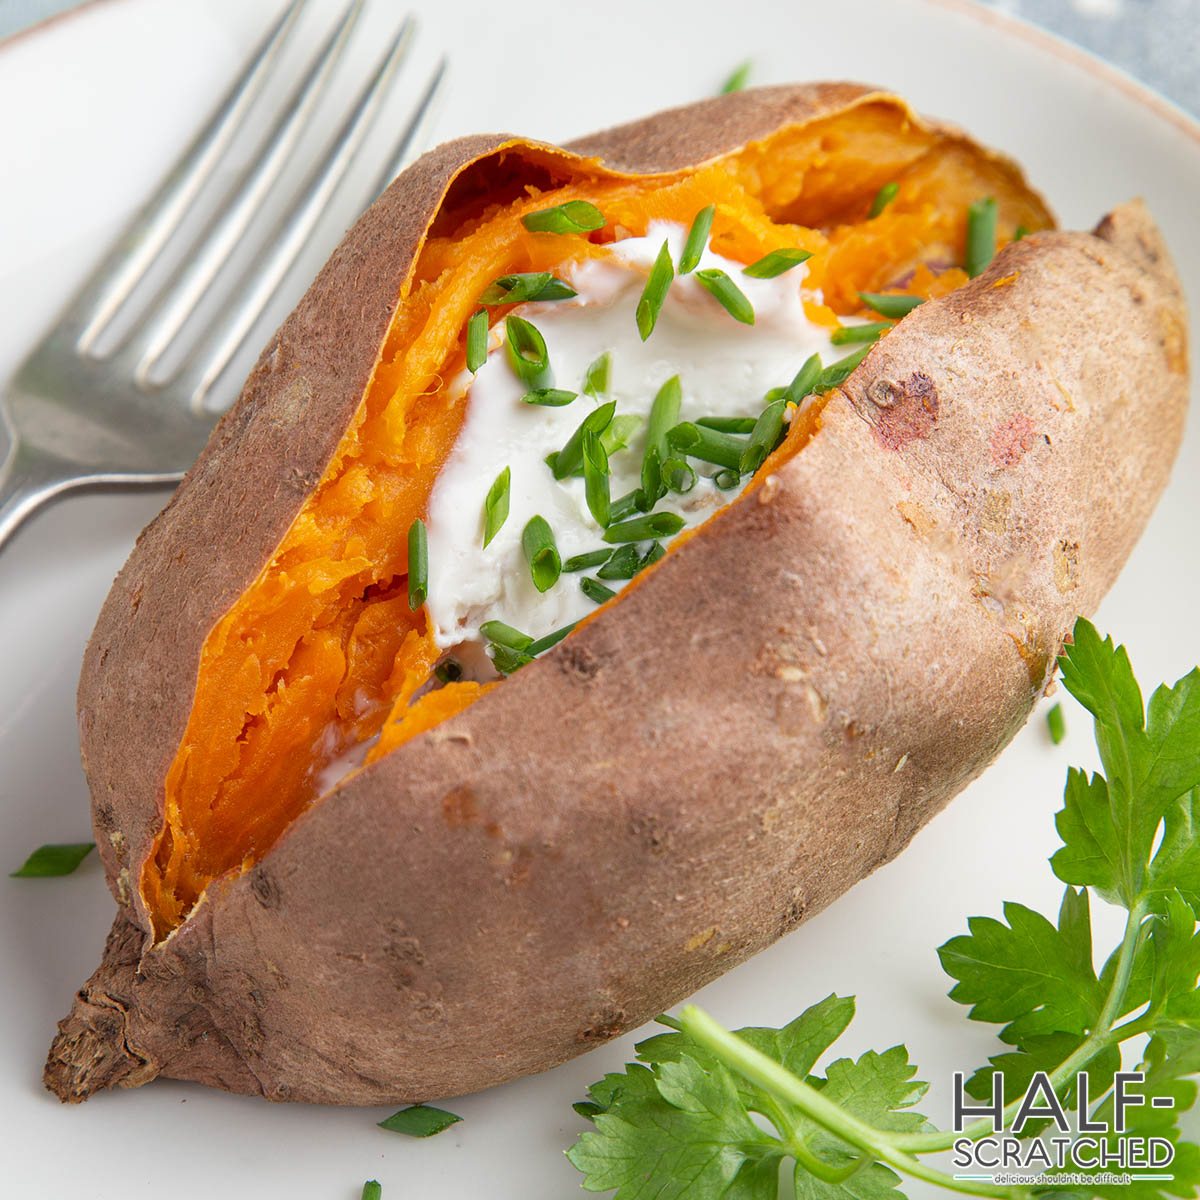 Cooked sweet potato with sauce